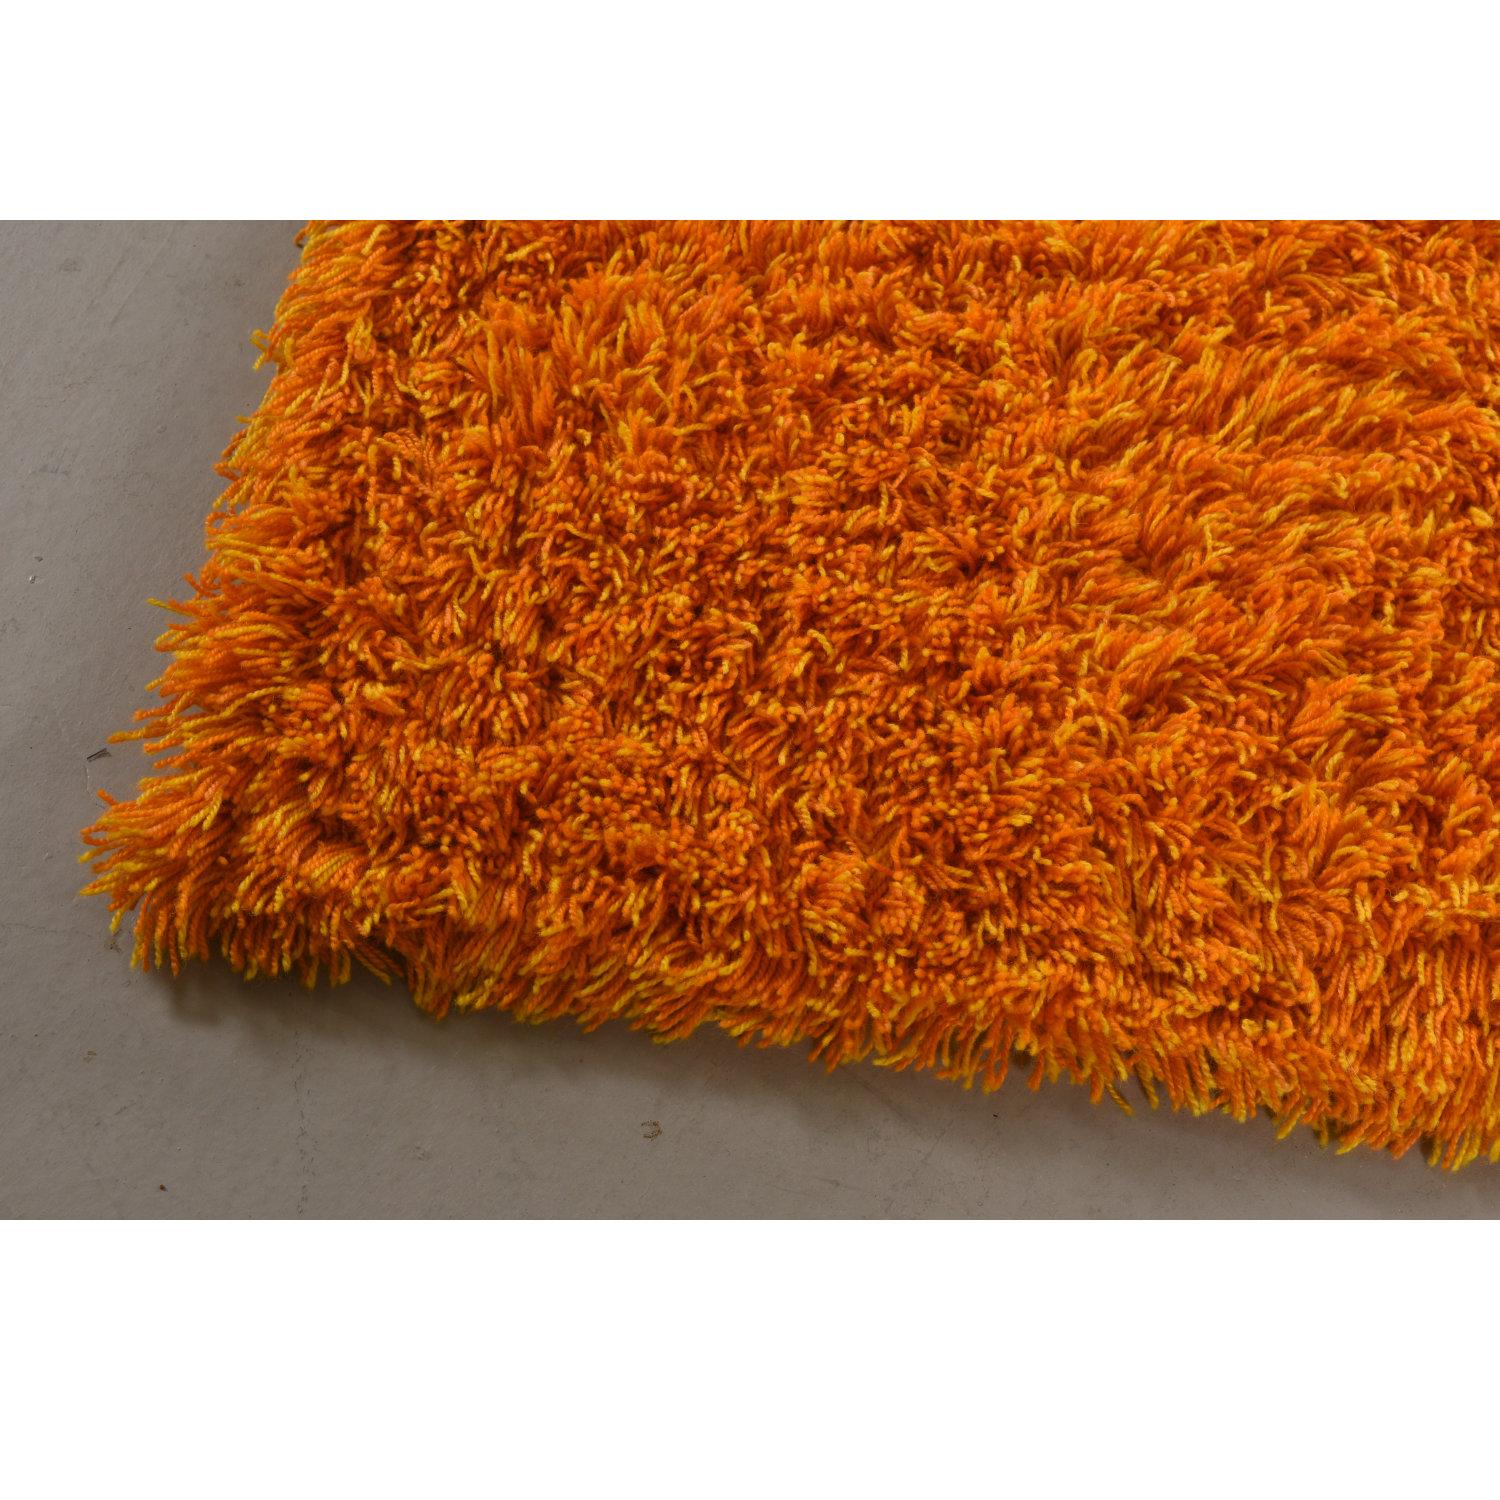 Huge Vintage Orange and Yellow Scandinavian Rya Shag Area Rug Runner In Good Condition For Sale In Chattanooga, TN